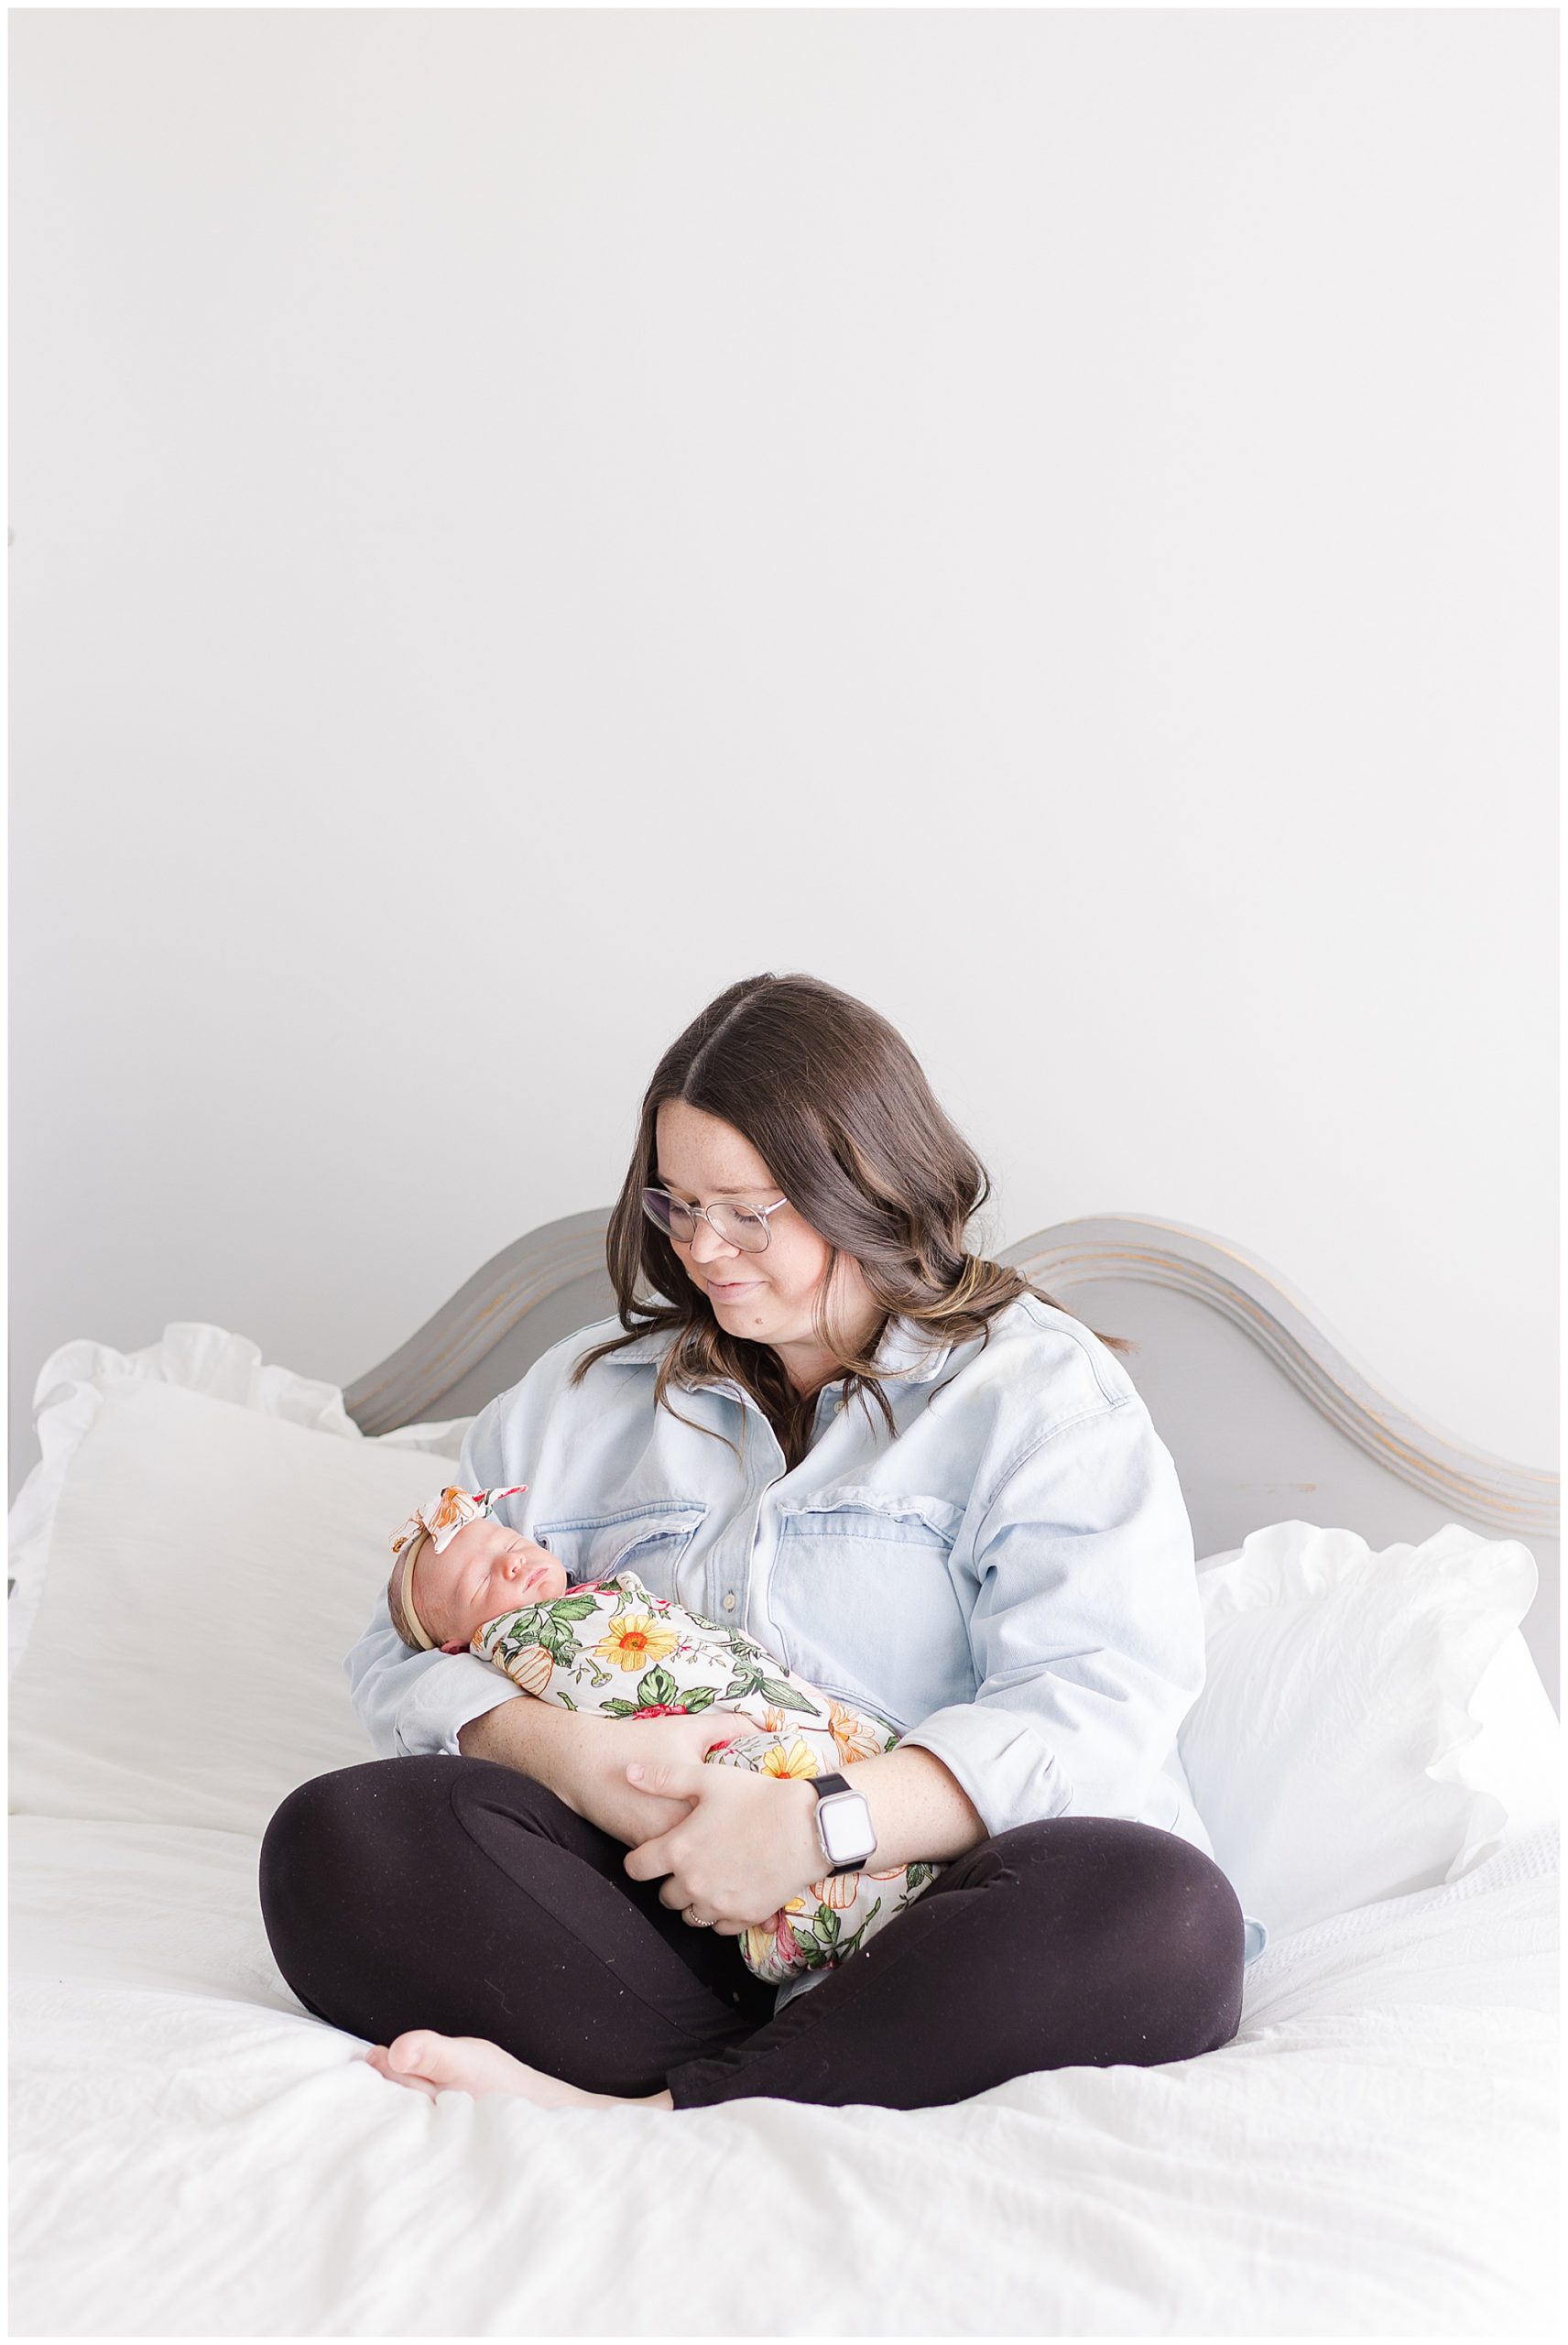 Mom in light blue button down and black pants sits on bed with white linens while holding newborn daughter in colorful floral swaddle and bow during lifestyle newborn session. 